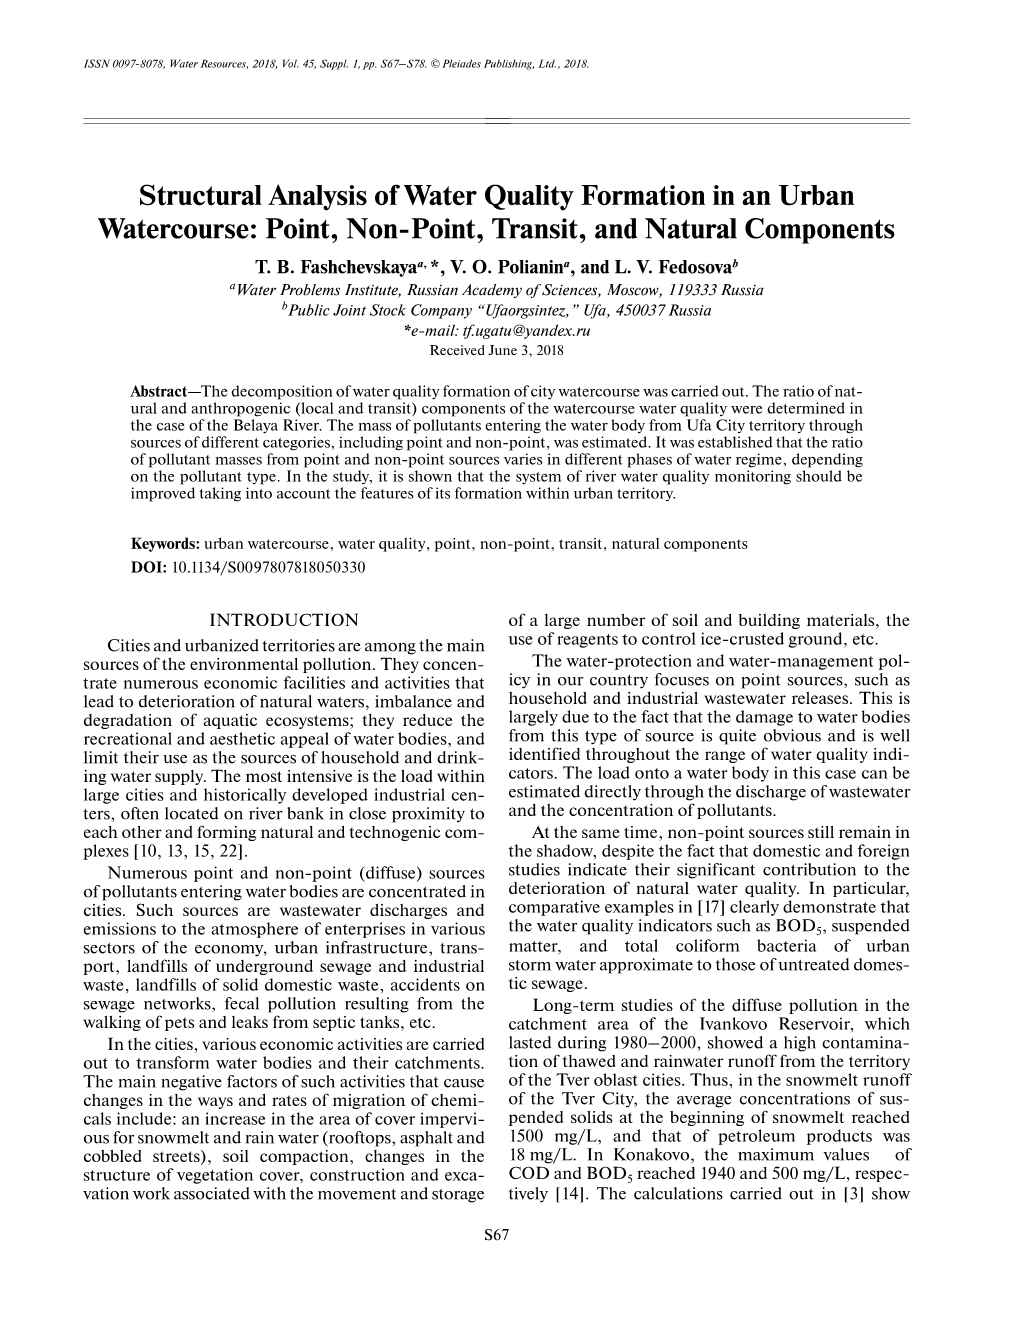 Structural Analysis of Water Quality Formation in an Urban Watercourse: Point, Non-Point, Transit, and Natural Components T